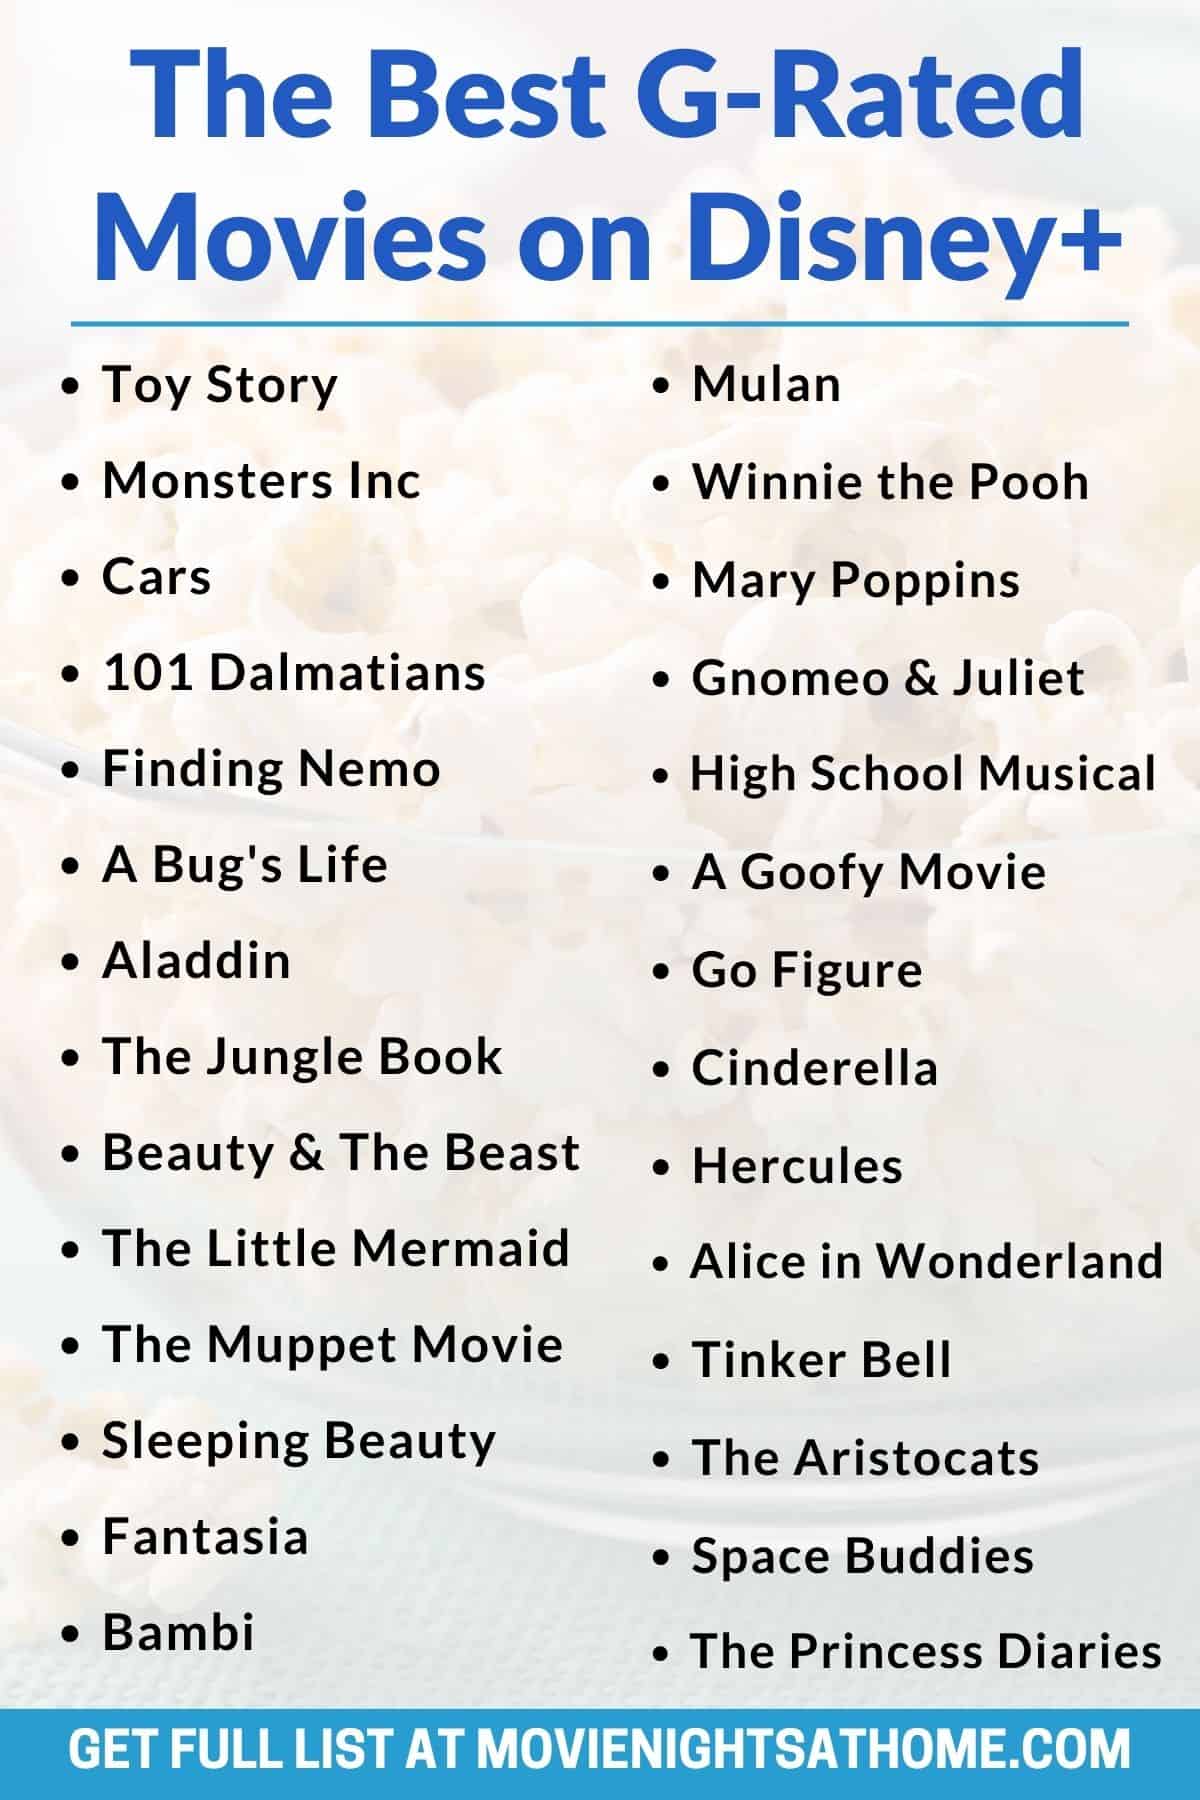 9 R-rated Movie Suggestions for Disney Plus